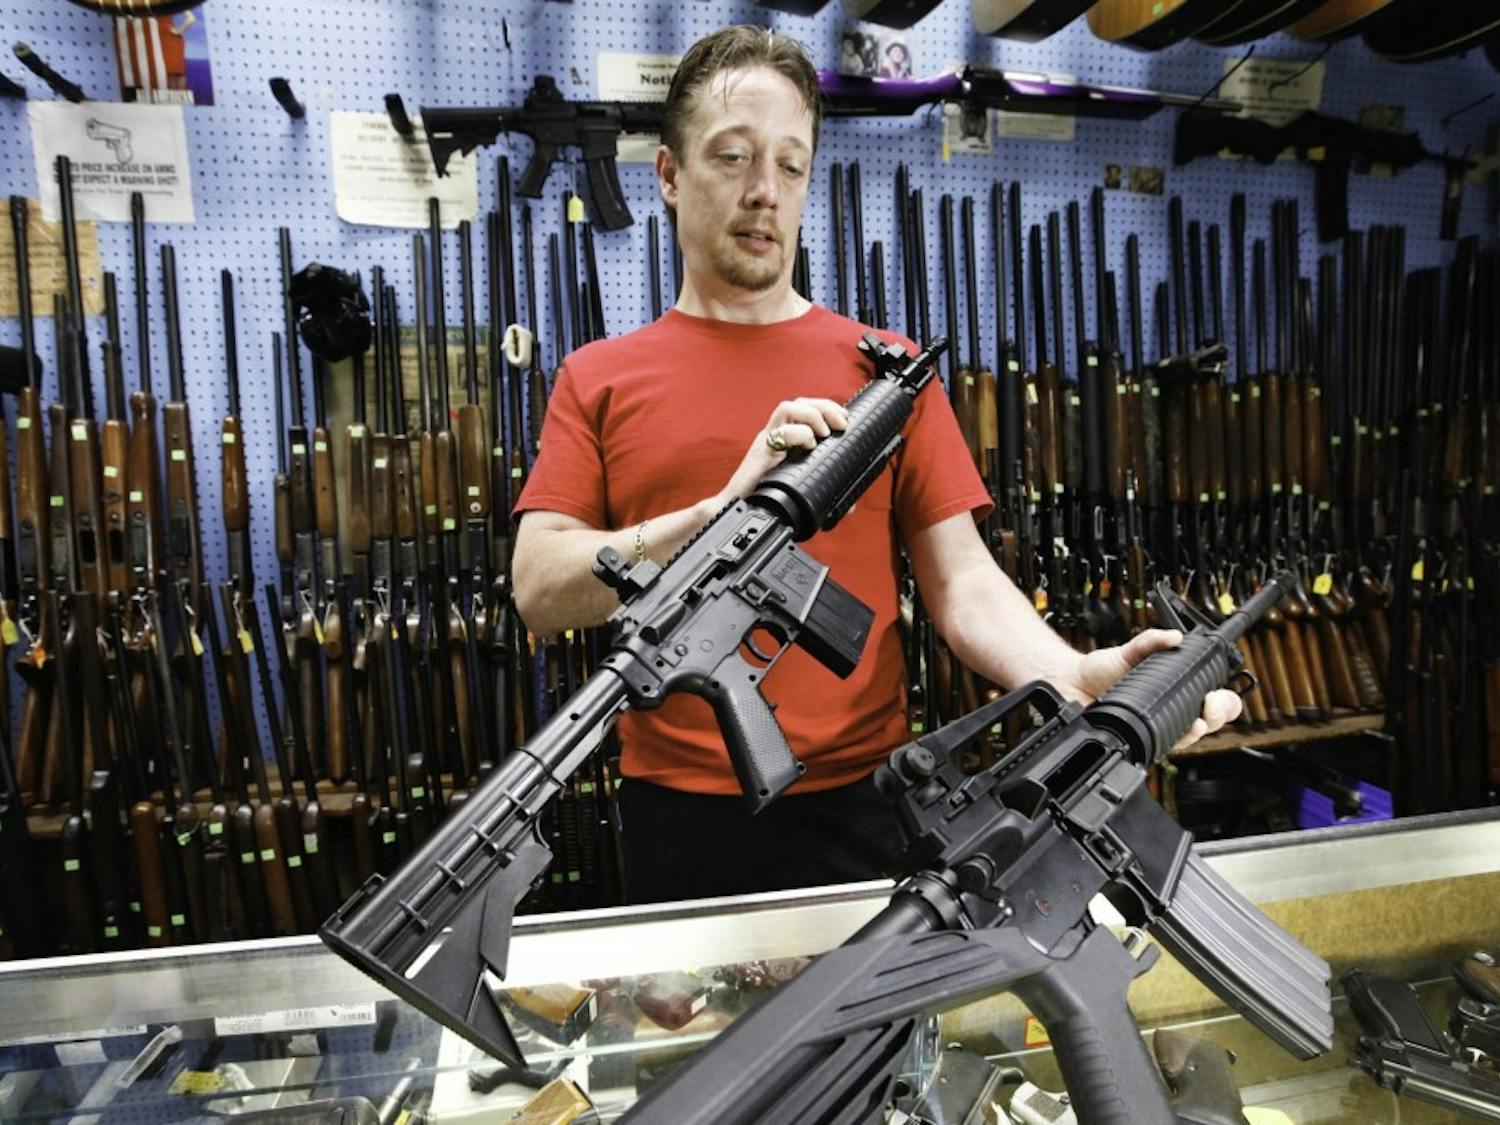 Shawn Bertke, manager of Rich's Pawn Shop in Dayton, Ohio, has two guns for sale that look virtually alike. At left is a $45 Crosman BB gun; the other is a $1,200 real AR-15 rifle. (Chris Stewart/Dayton Daily News/MCT)